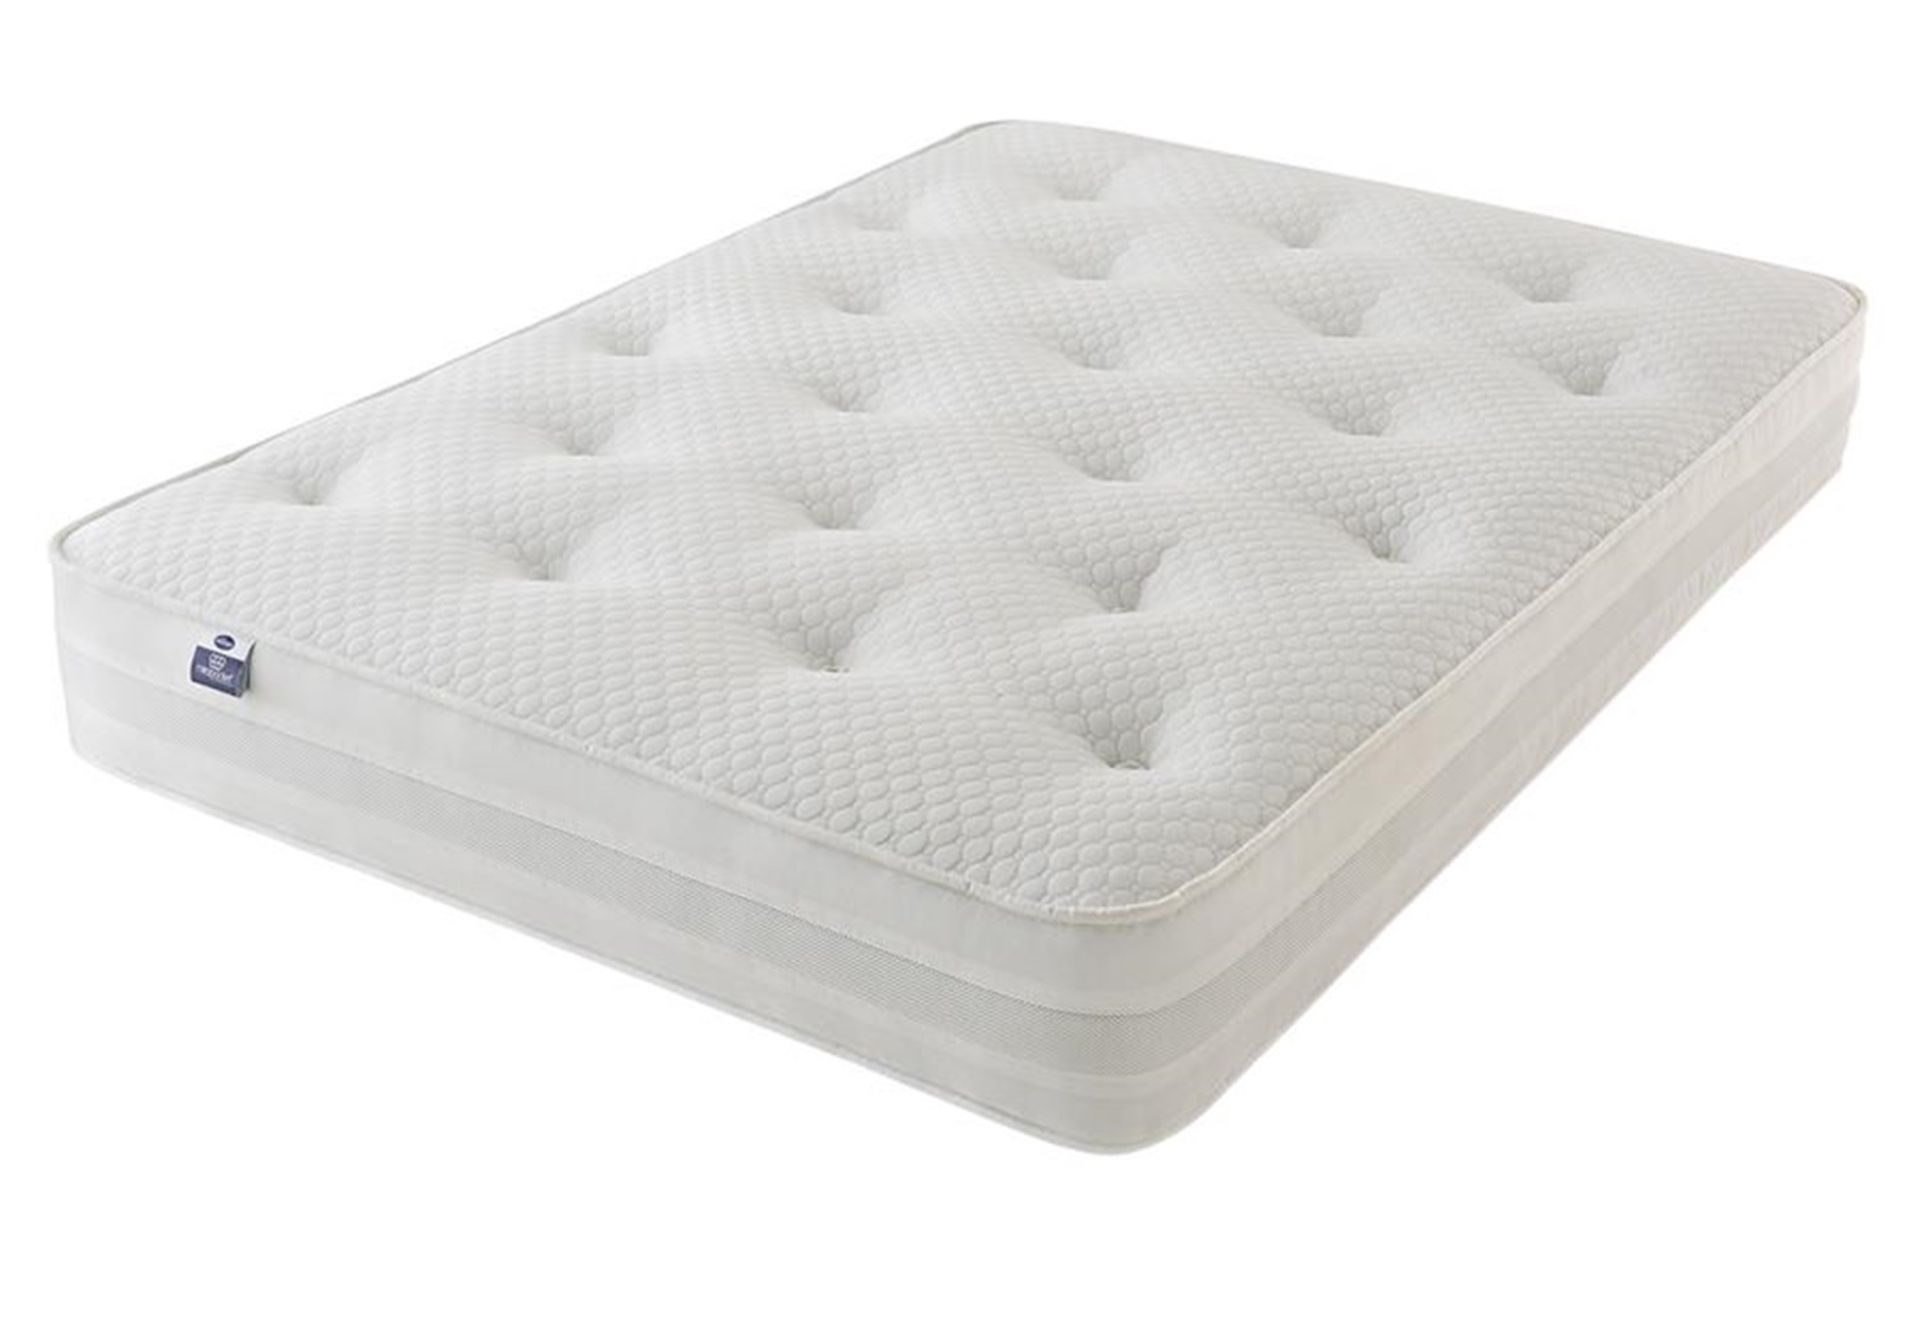 Brand new direct from the manufacturers 5'0 Rhapsody pocket sprung with memory foam mattress, the